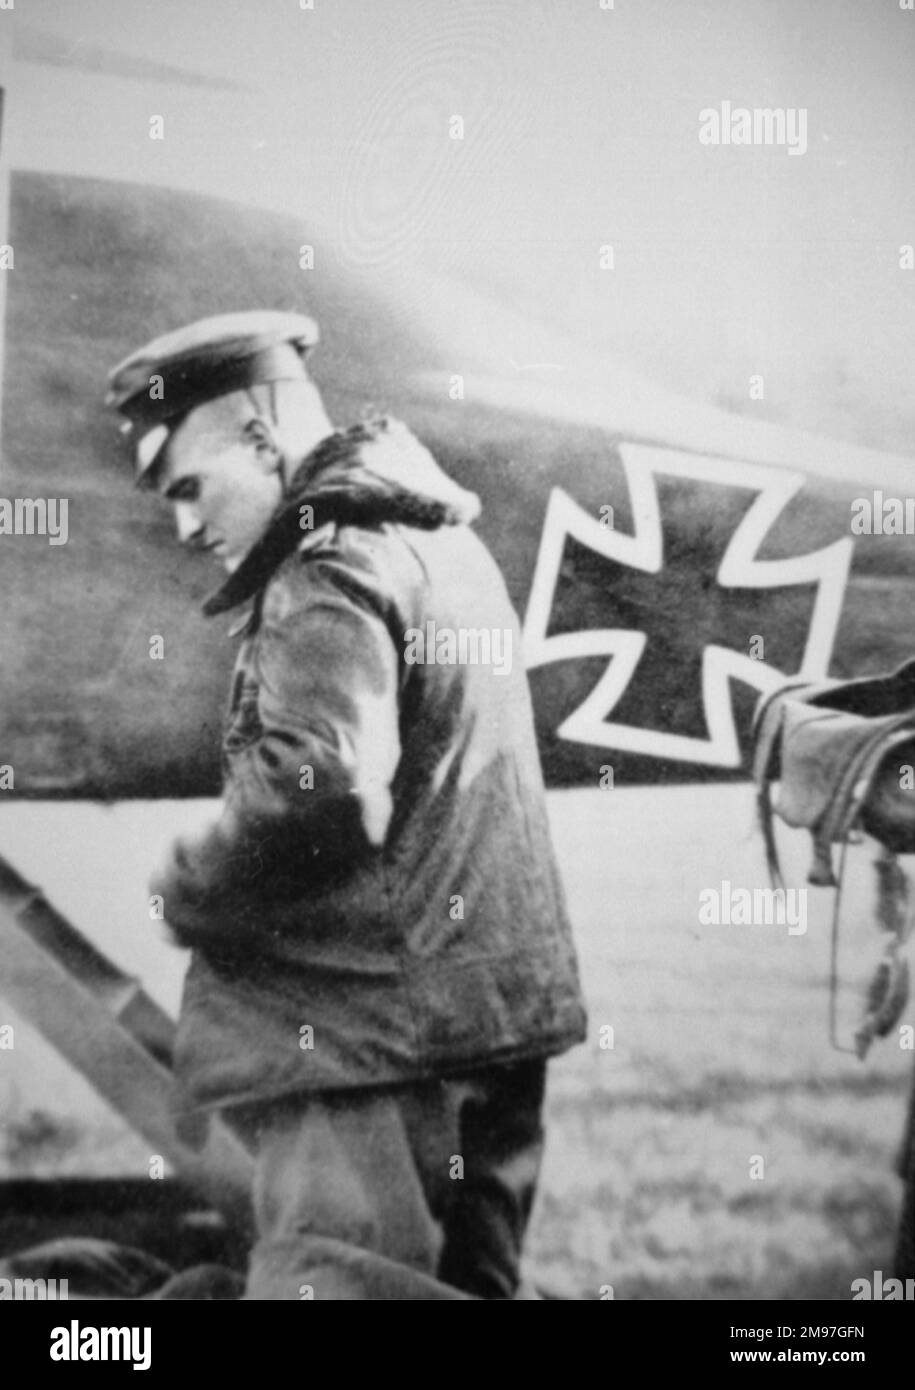 Baron Manfred von Richthofen (1892-1918), leading German air ace with 80 confirmed victories, seen here with his personal Albatros C IX biplane. Stock Photo